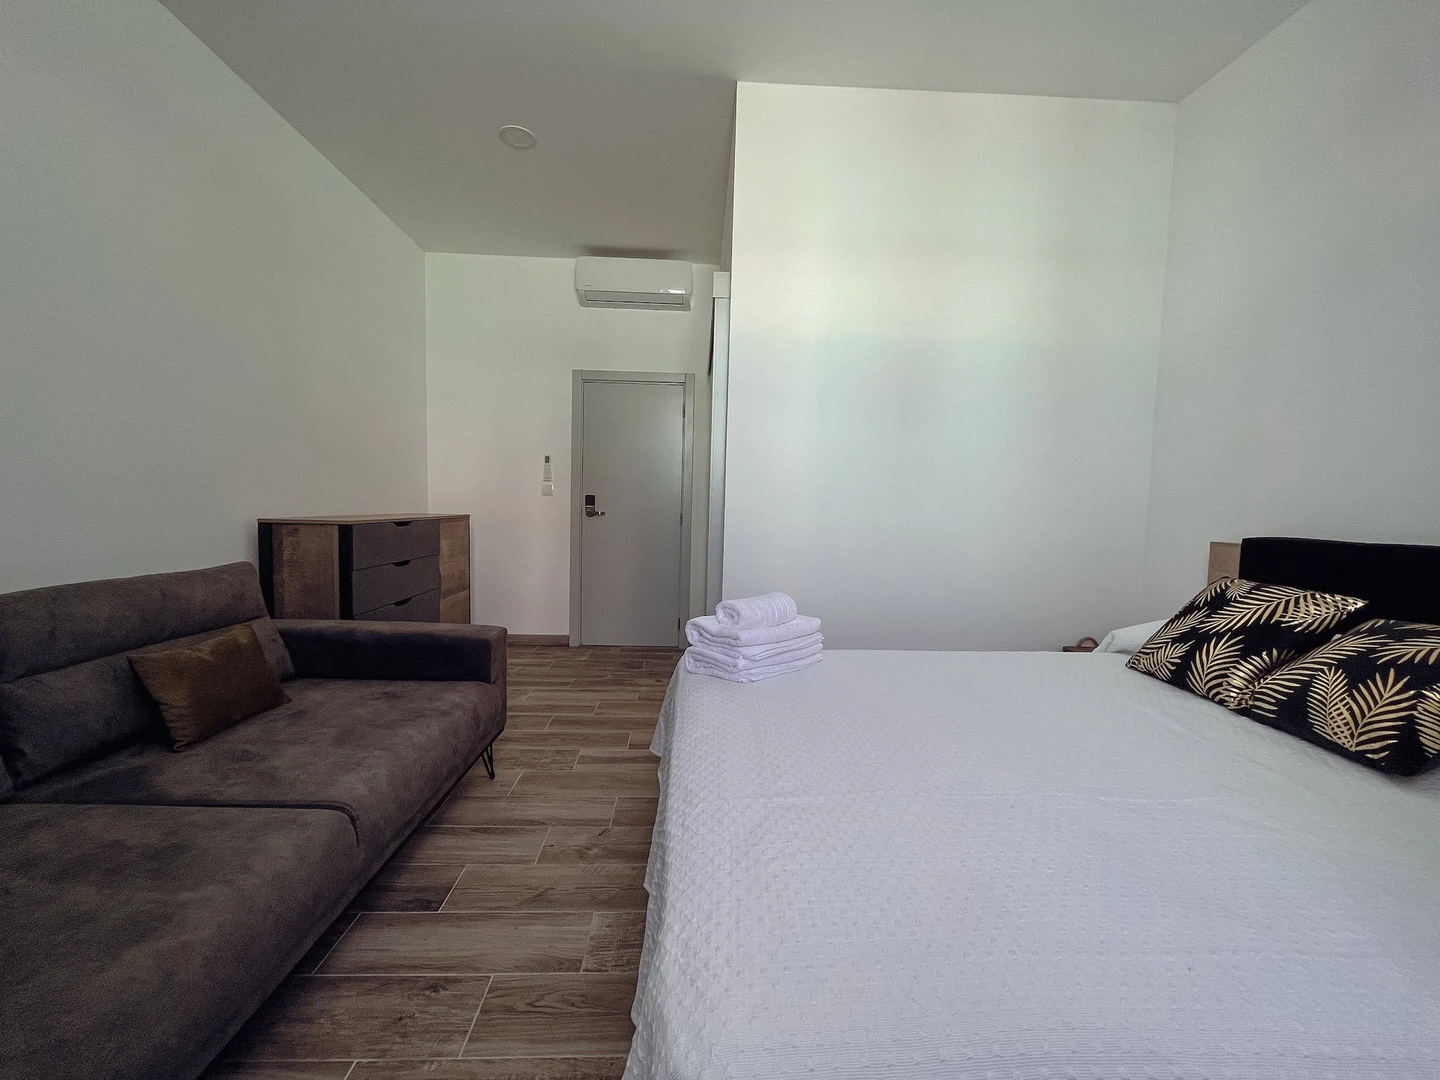 Room for rent with double bed Faro